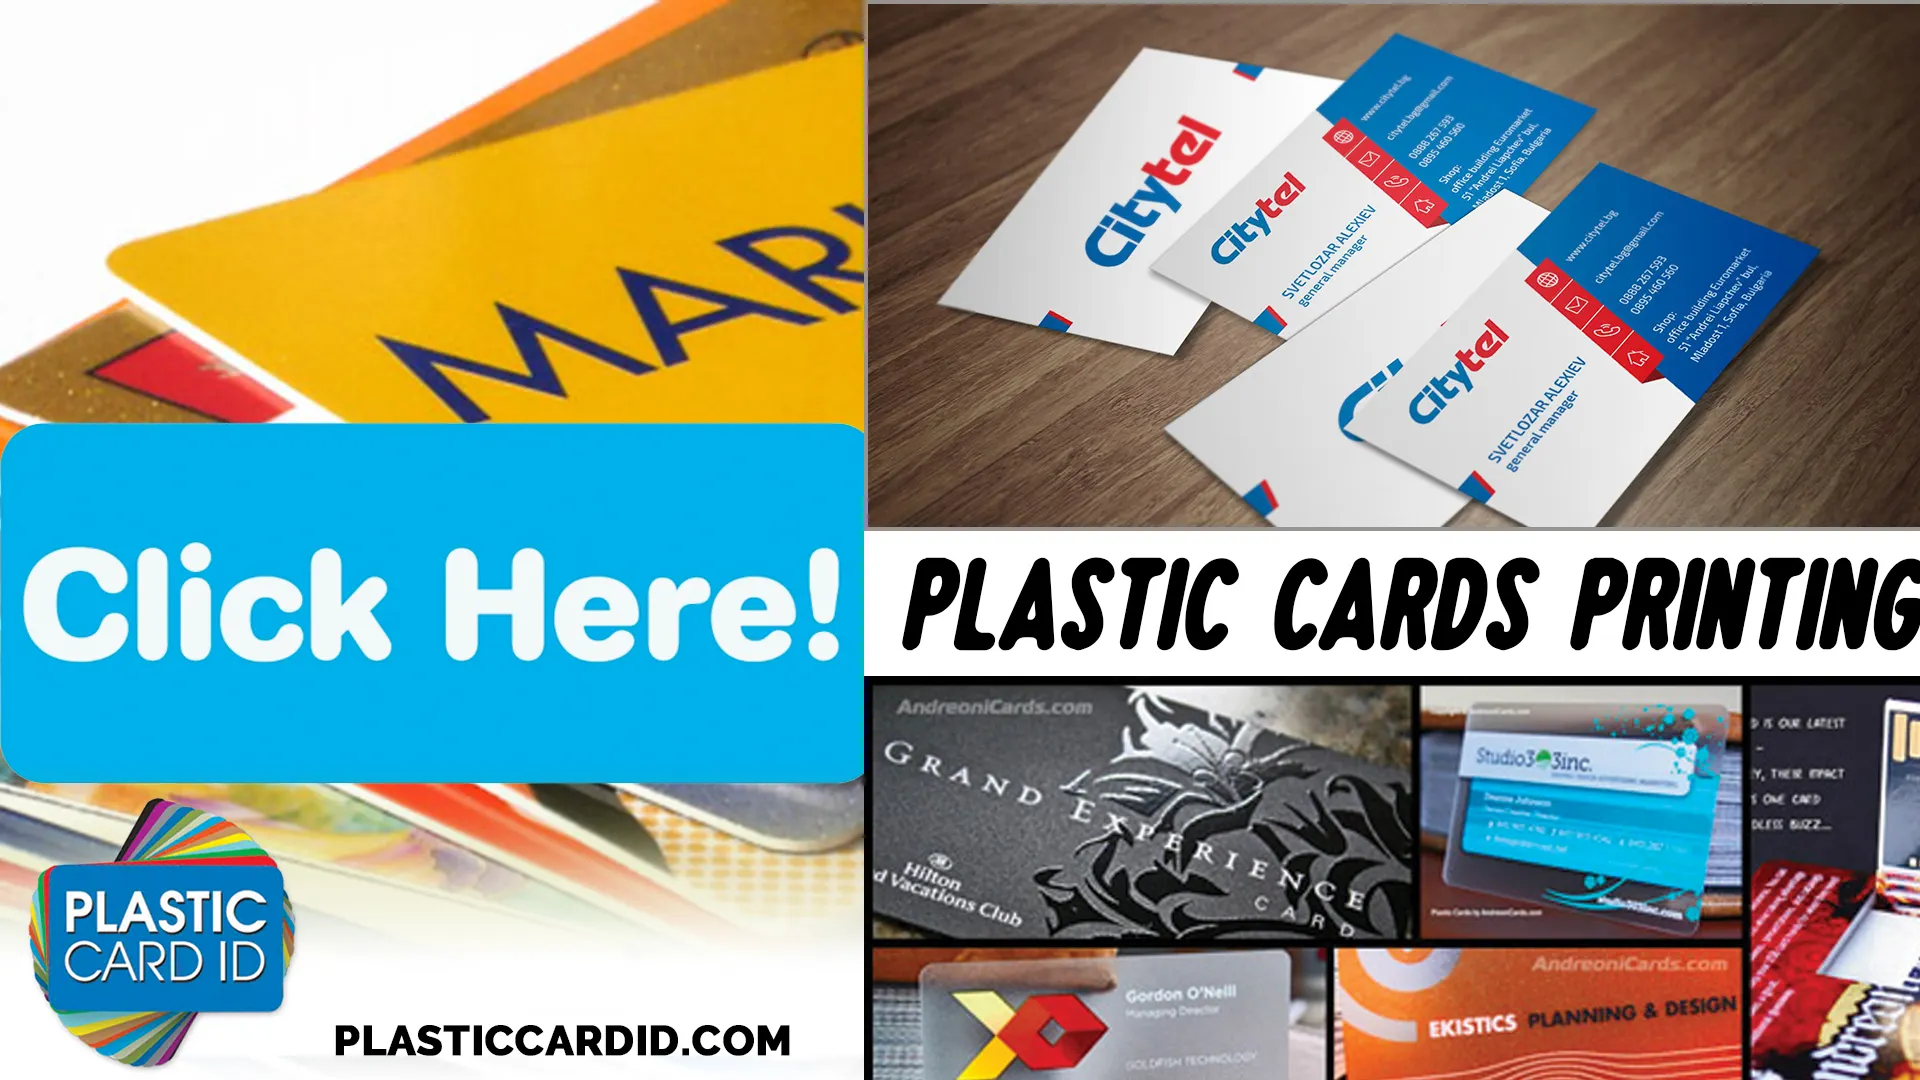 Catering to Your Brand's Unique Style with Plastic Card ID
